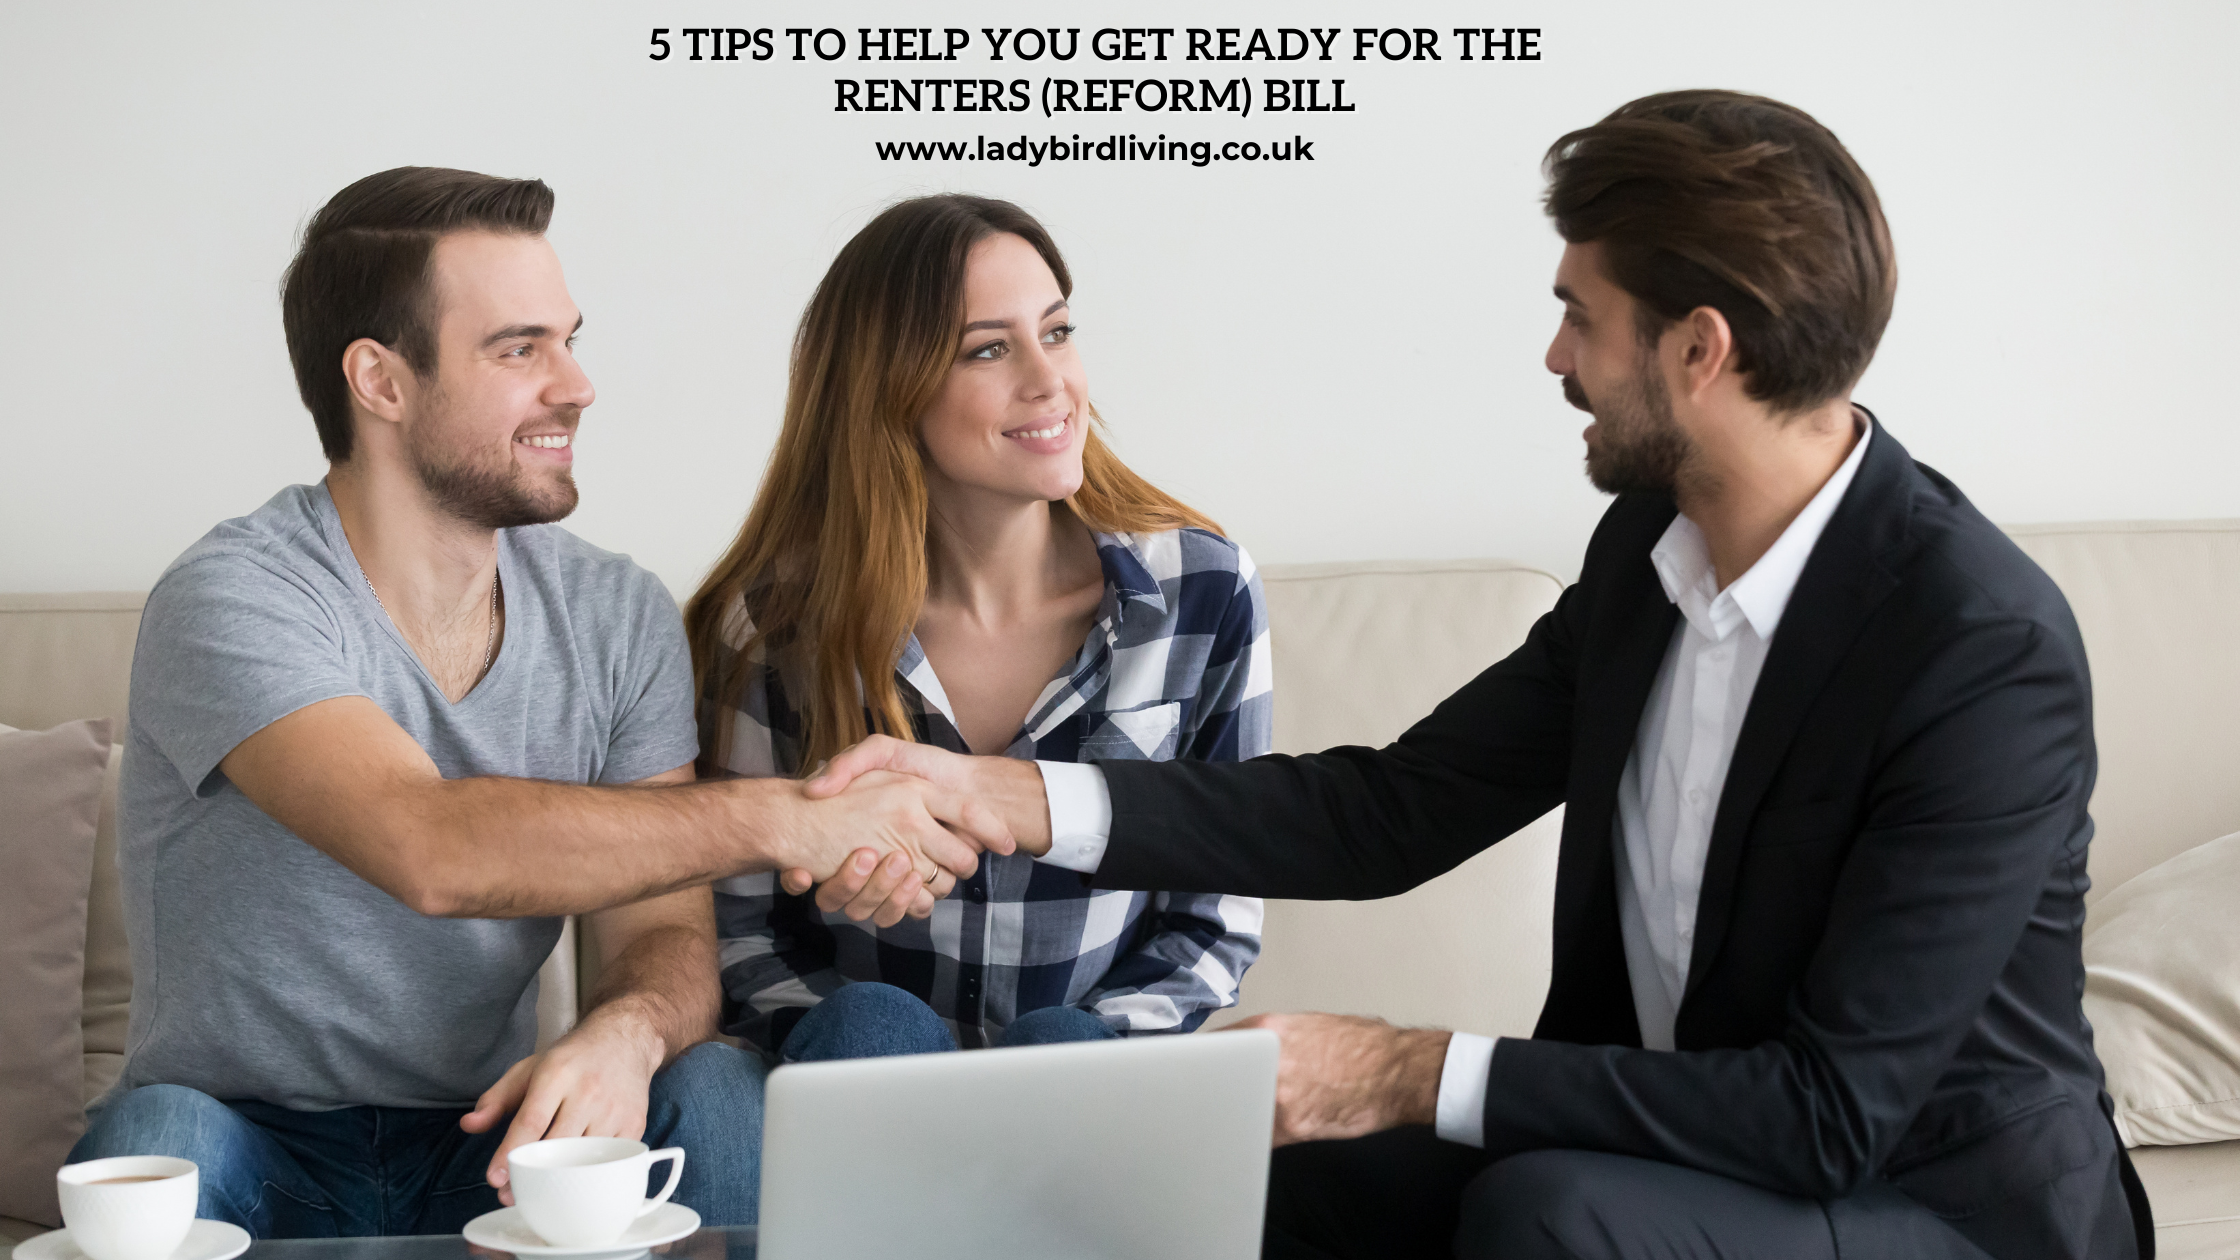 5 Tips to Help You Get Ready for the Renters (Reform) Bill